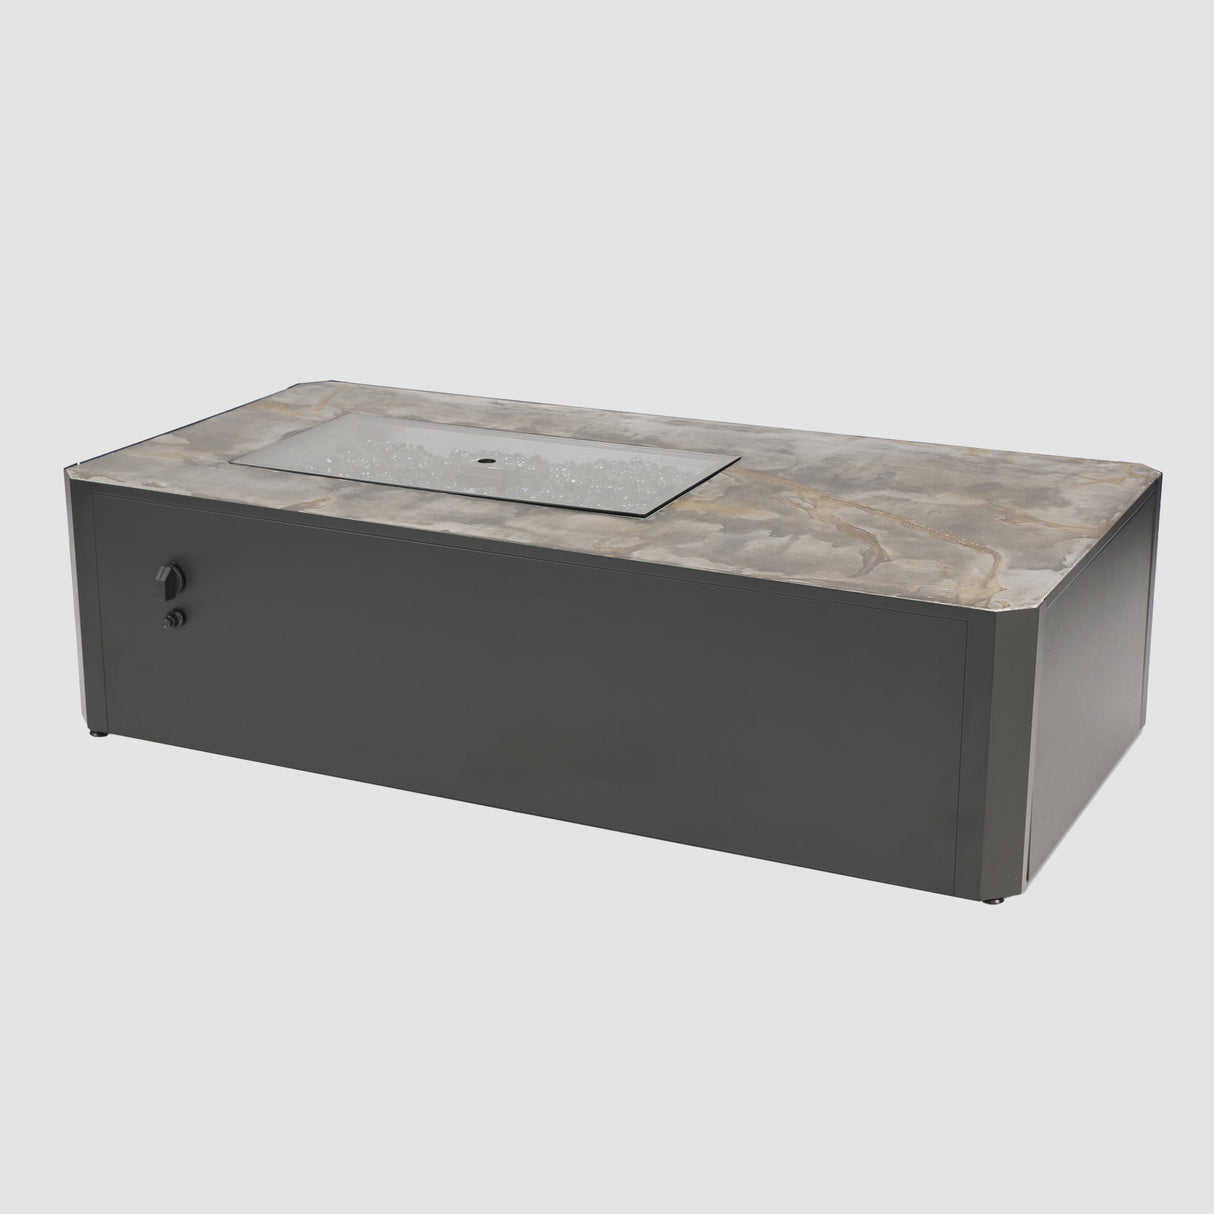 The Kinney Rectangular Gas Fire Pit Table with a glass cover on a grey background